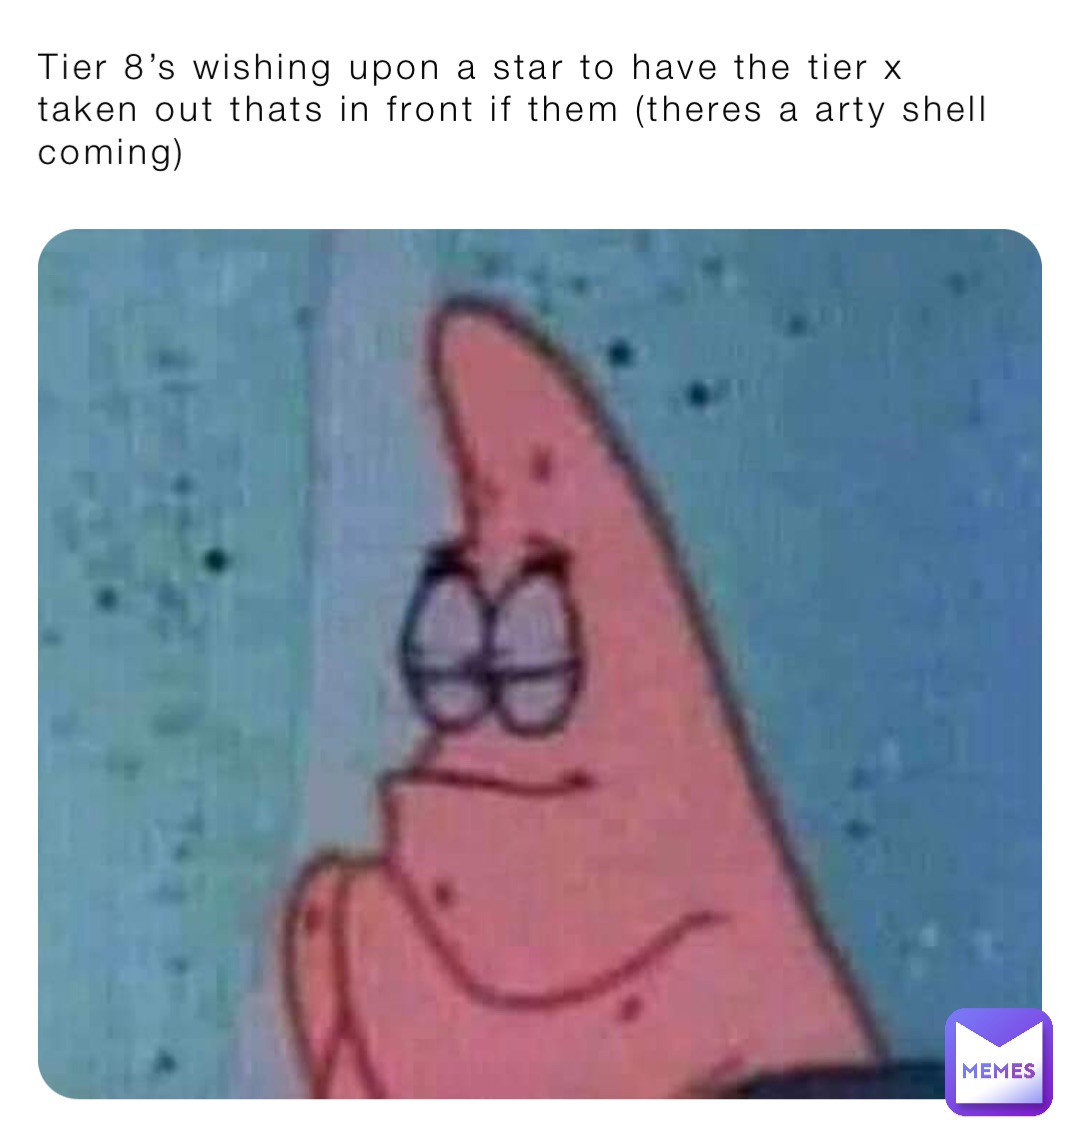 Tier 8’s wishing upon a star to have the tier x taken out thats in front if them (theres a arty shell coming)